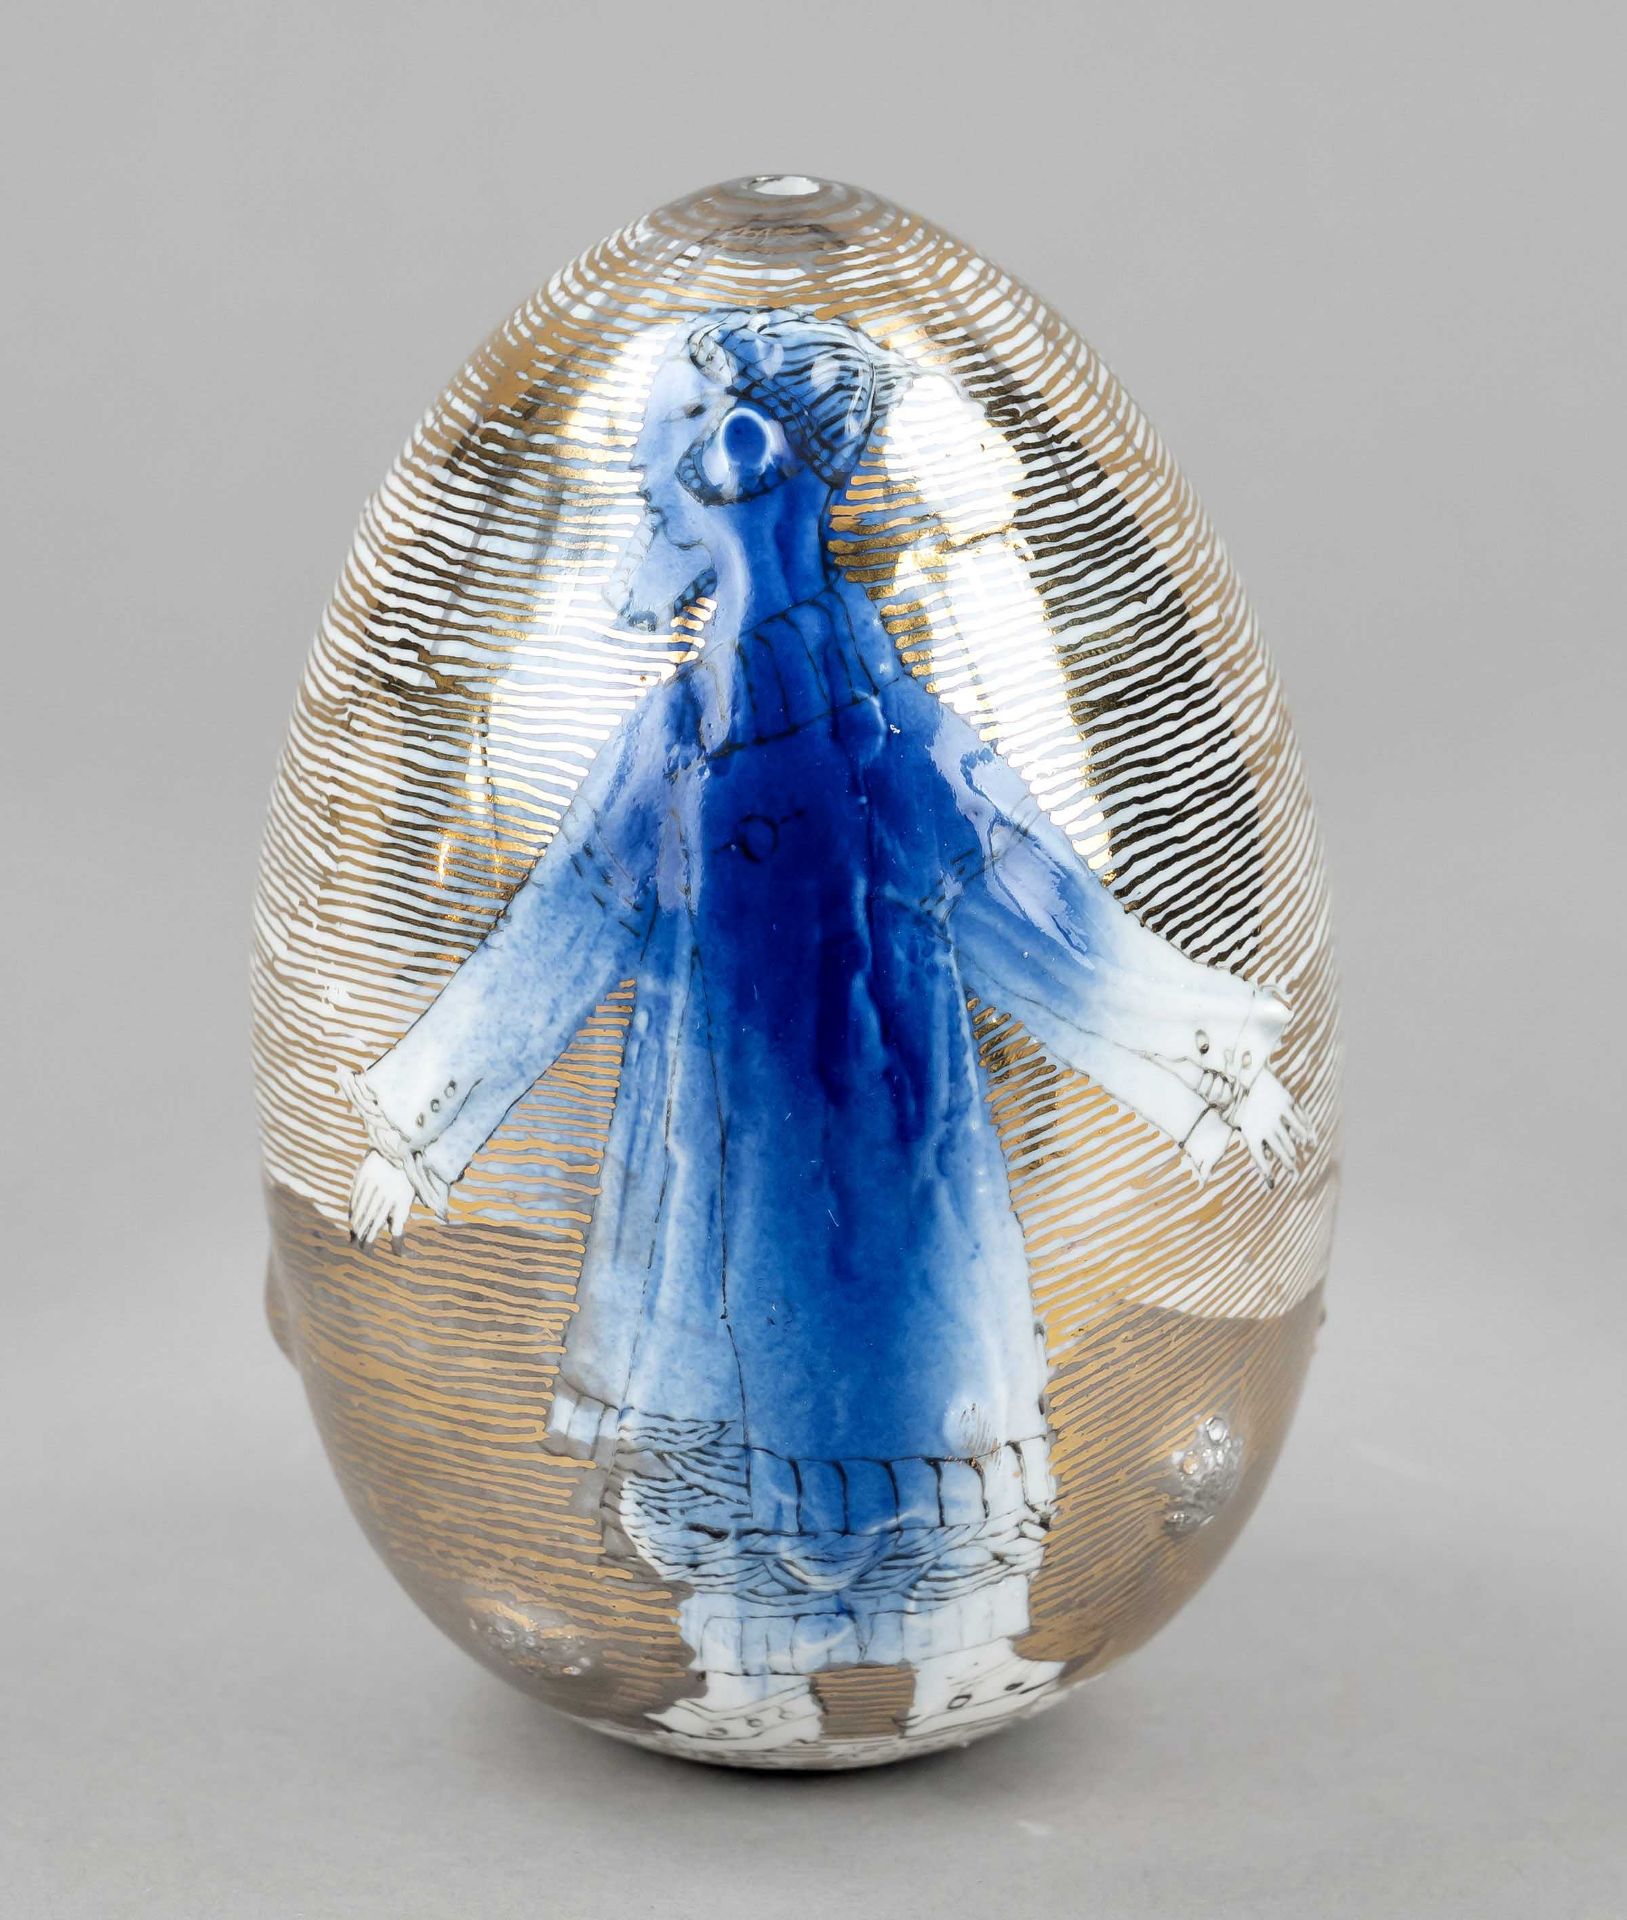 Pair of ornamental eggs, unique, design Tatiana Charpurgina, signed and dated 2010, painted with - Image 2 of 2